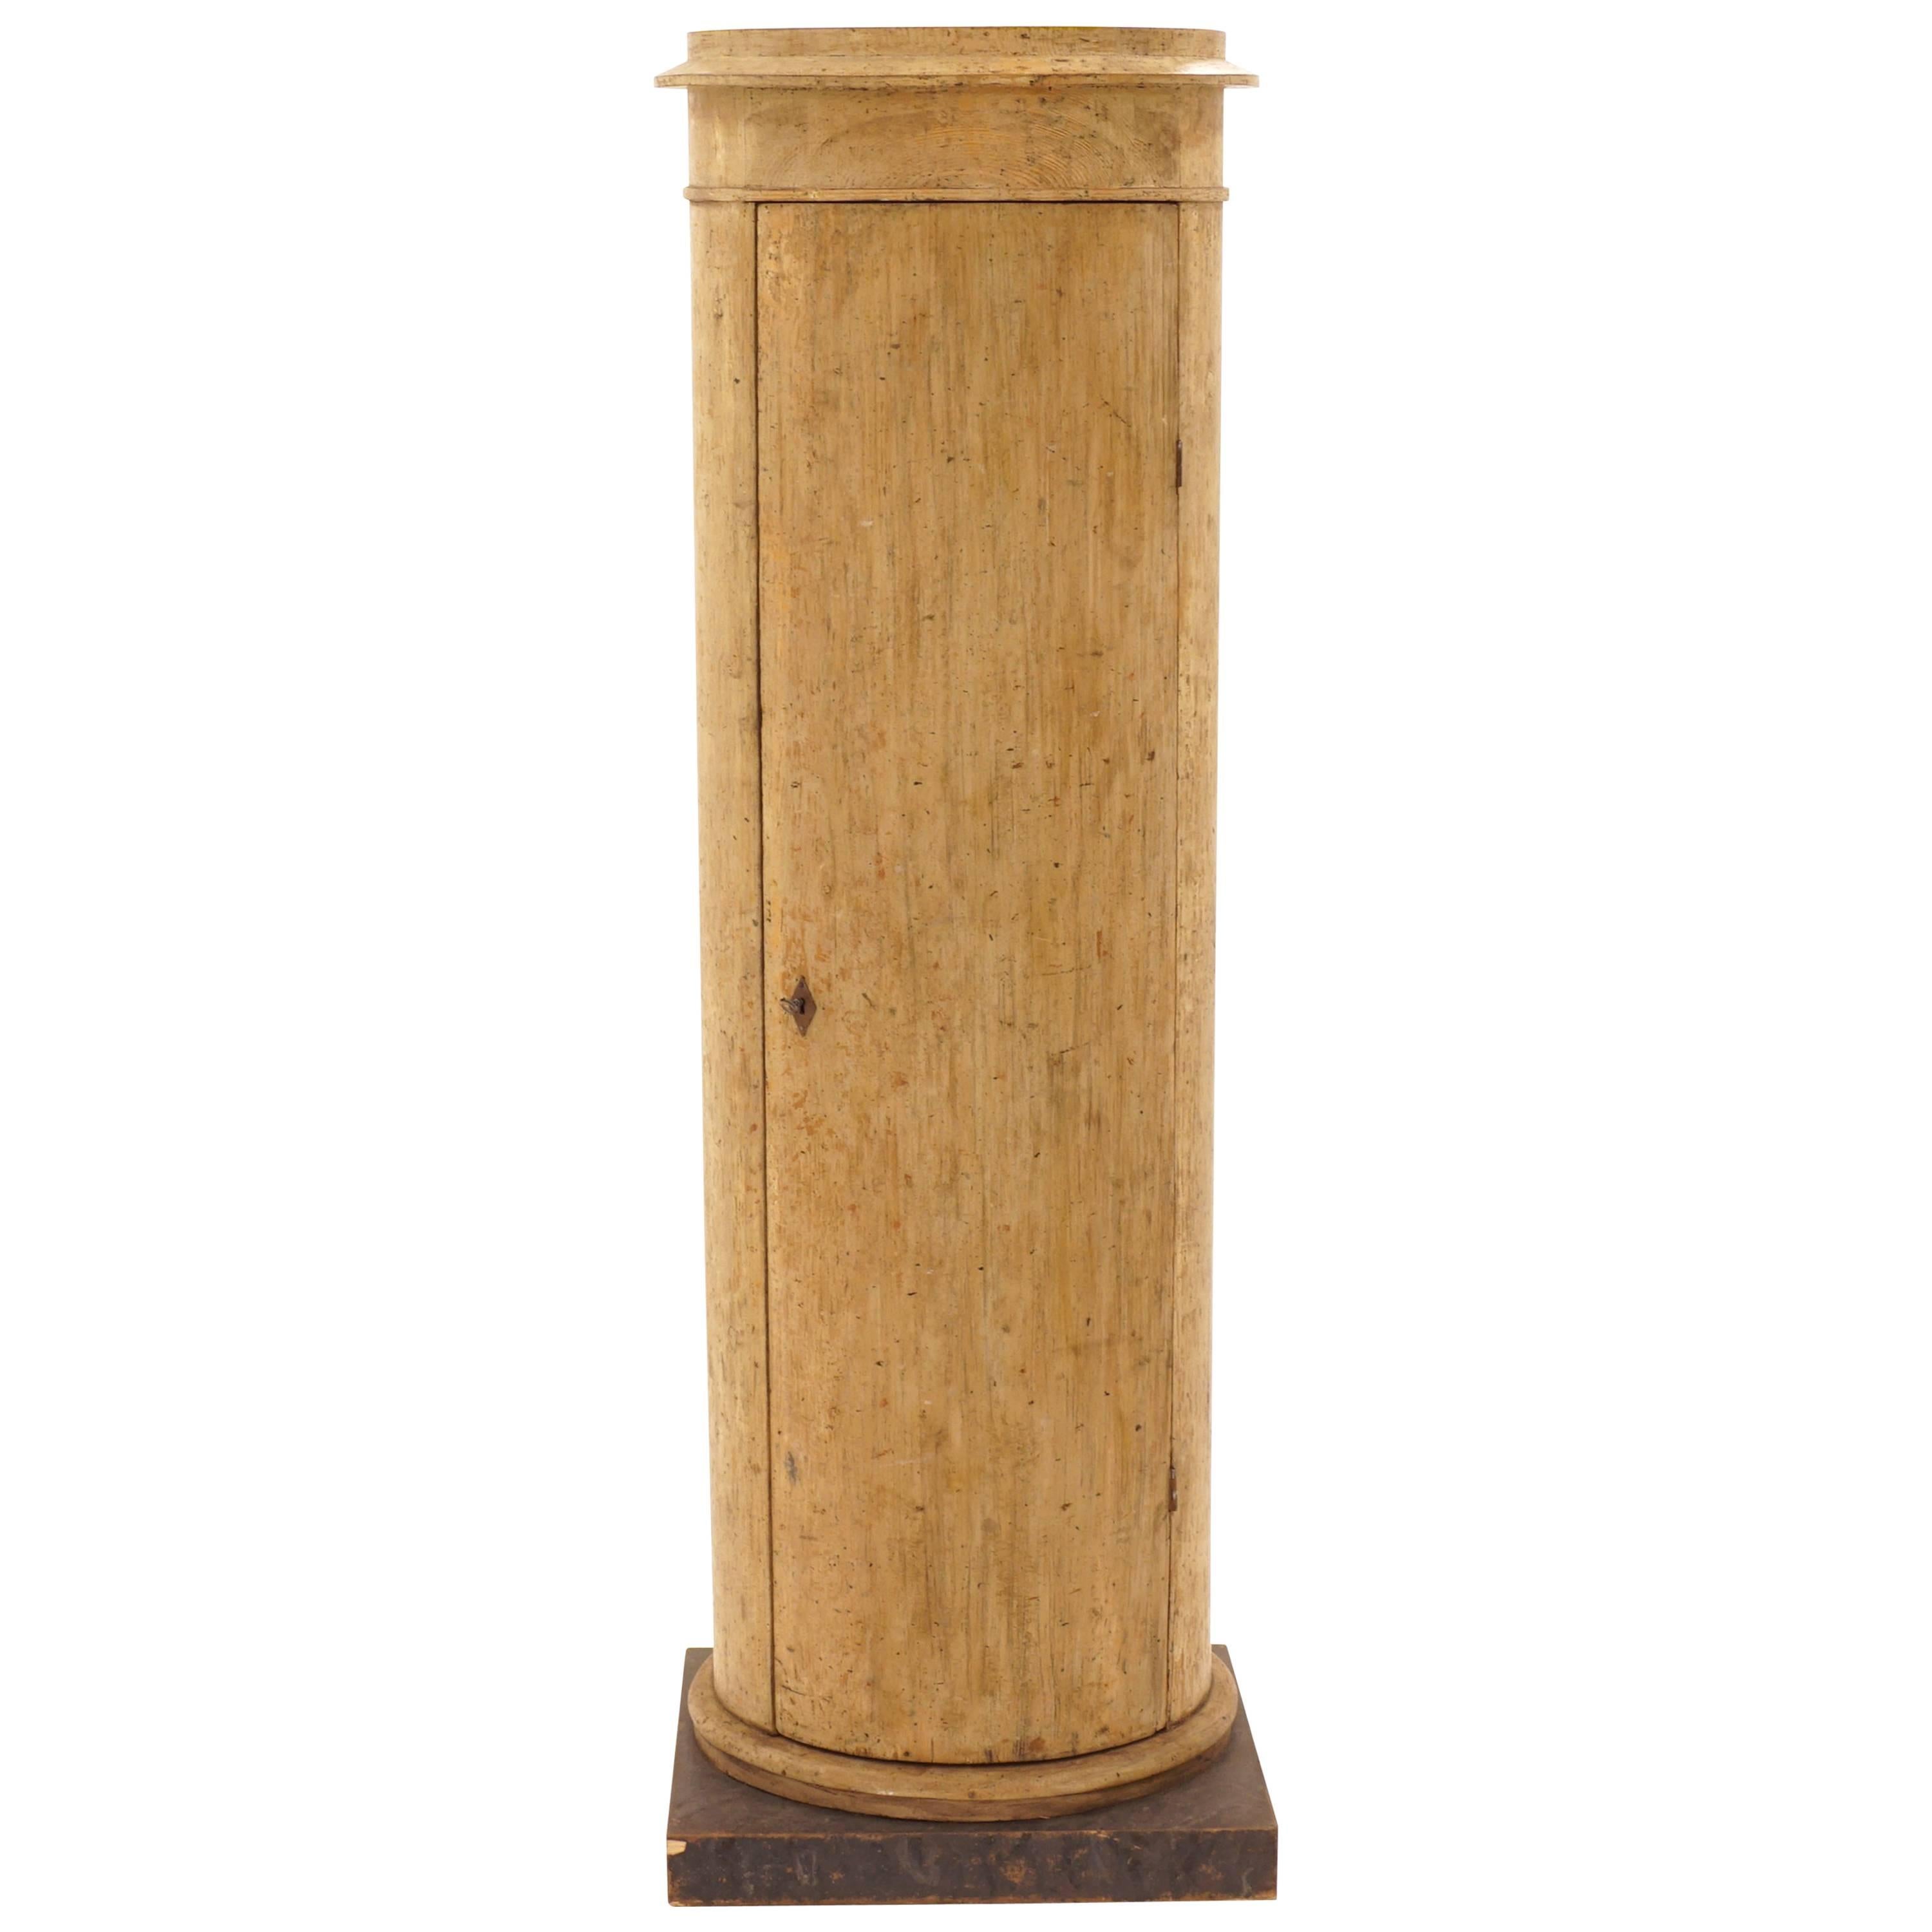 Early 19th Century Gustavian Column Pedestal Cabinet For Sale